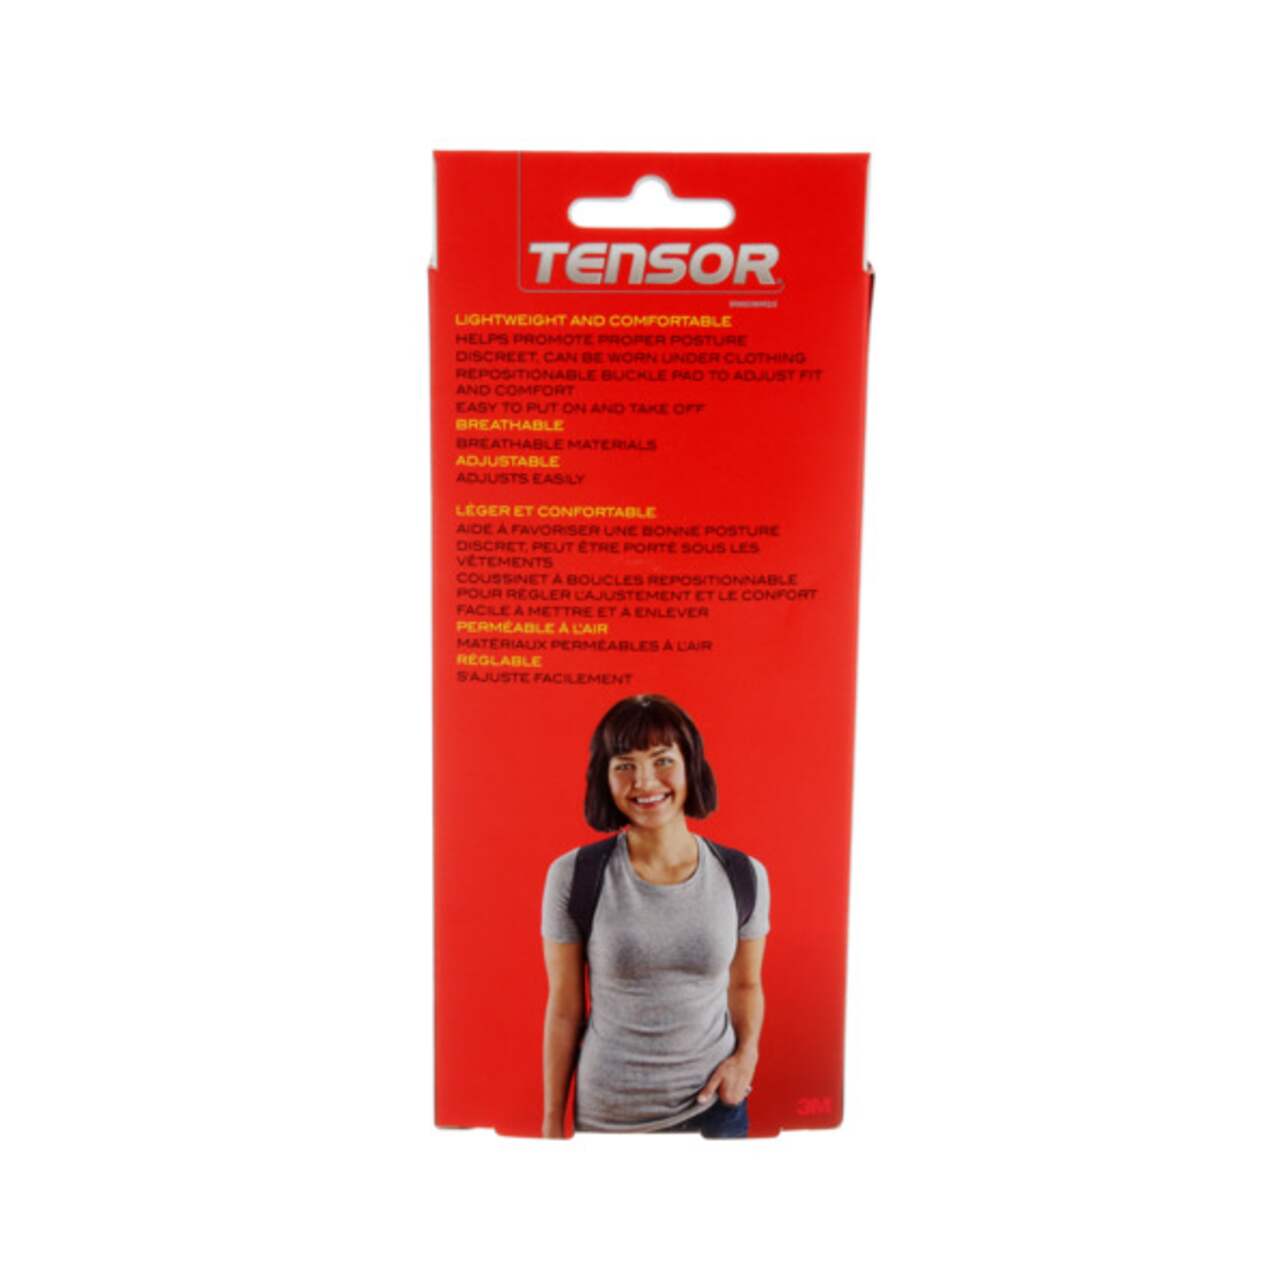 Tensor™ Sport Therapeutic Arch Support, Adjustable